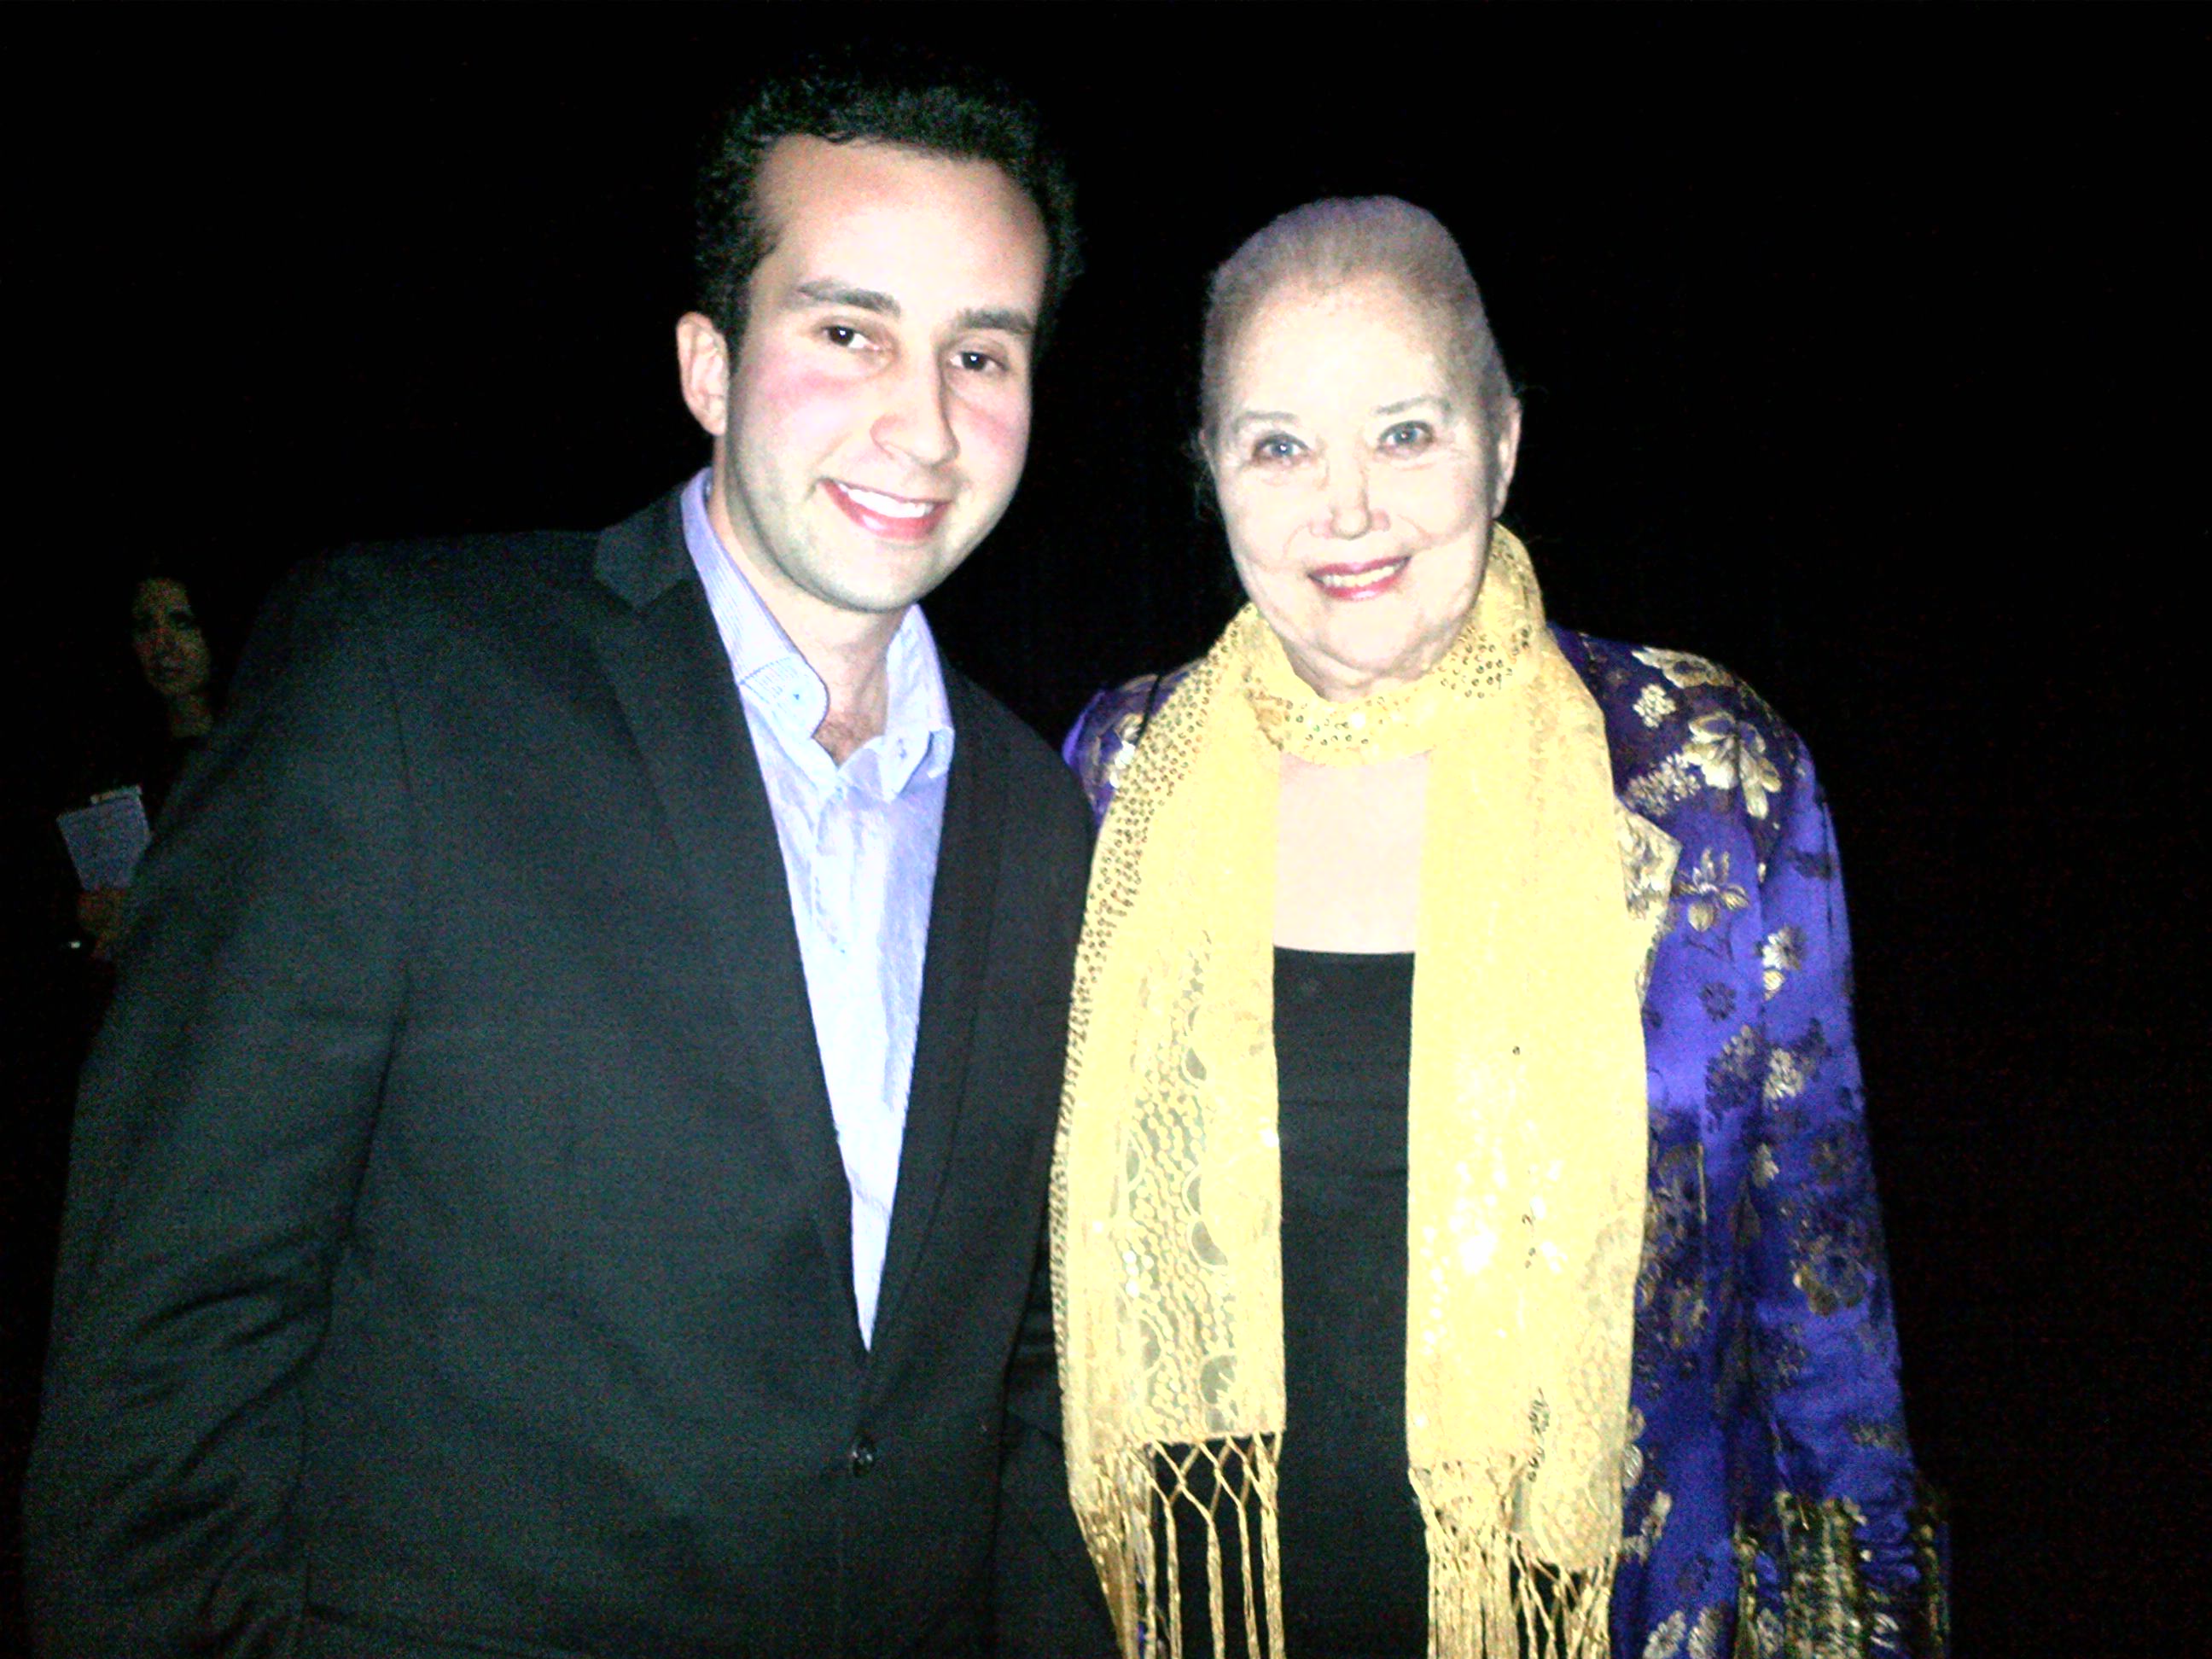 Actors Paul Tirado and Sally Kirkland in The Wayshower premiere at the Arclight Cinerama Dome.